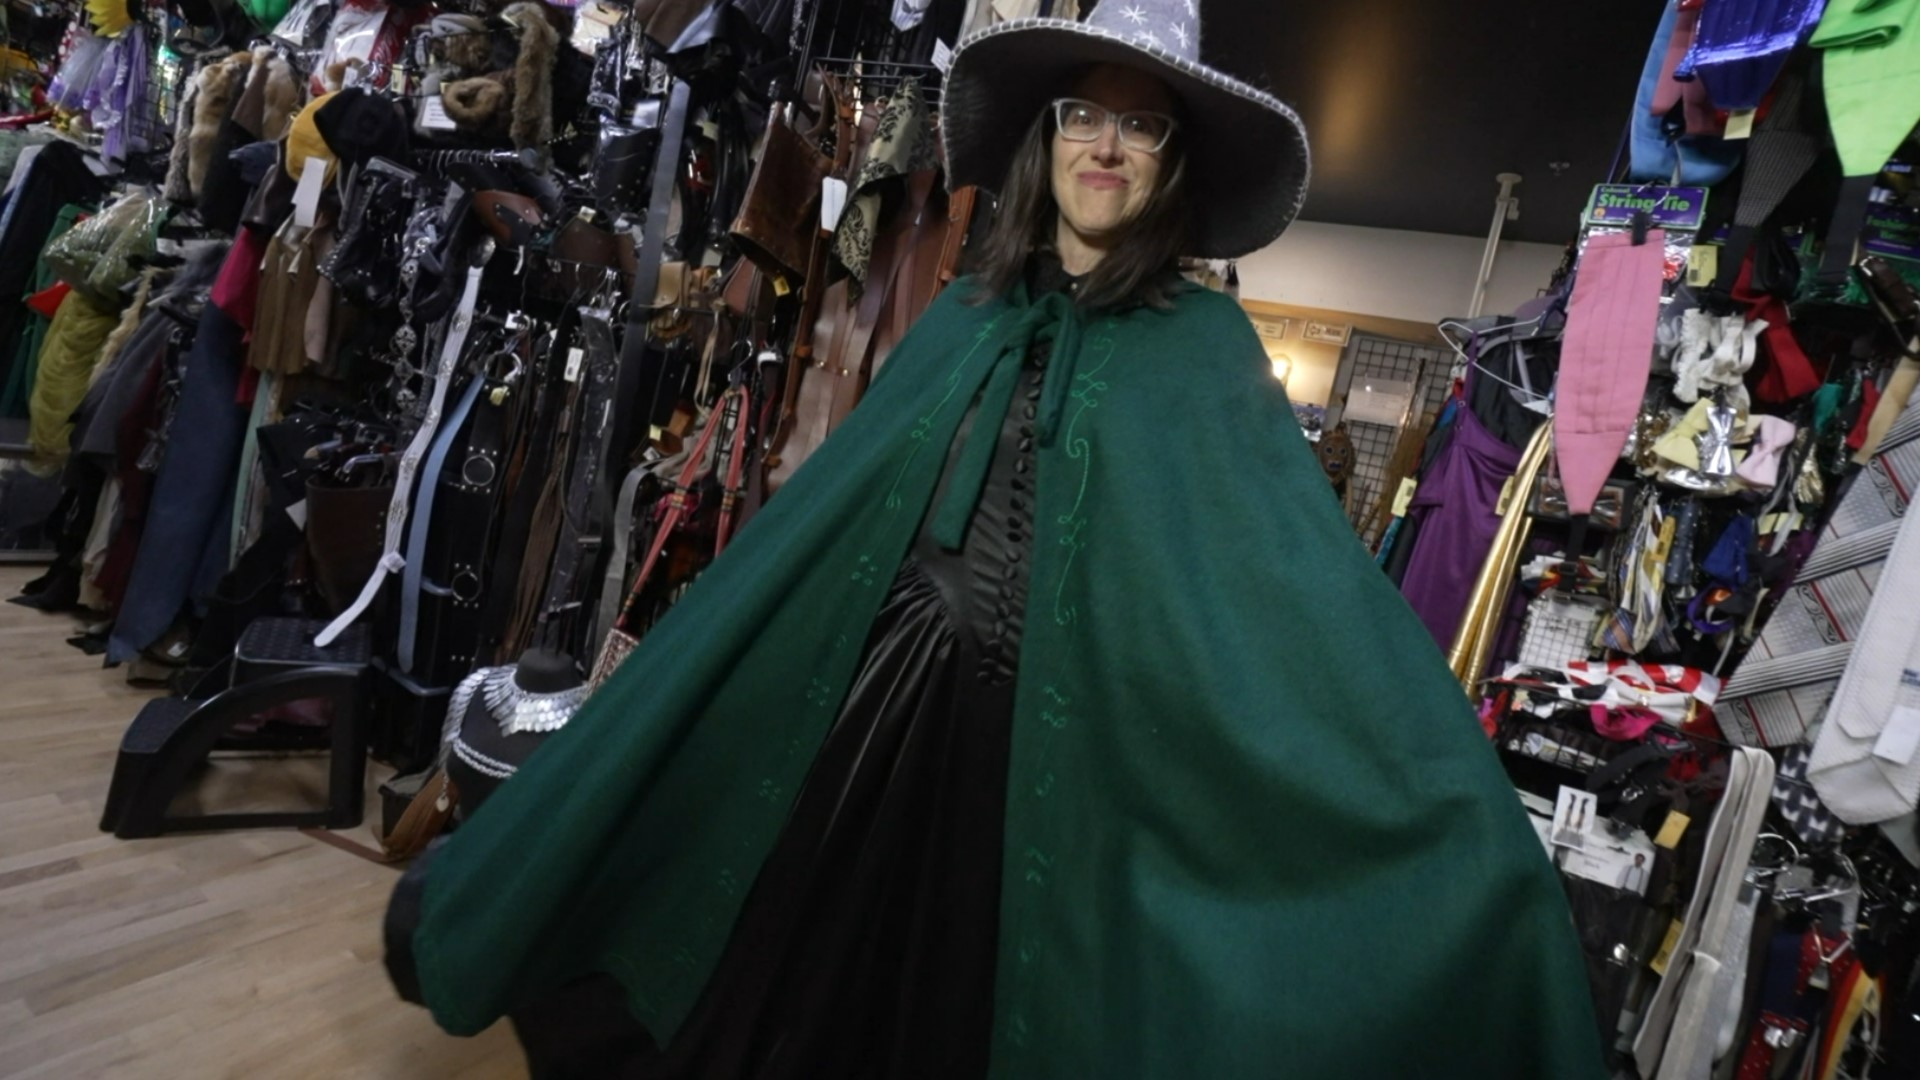 Redmond's "A Masquerade" has been providing stage-worn and handcrafted clothing and props for 24 years. #k5evening